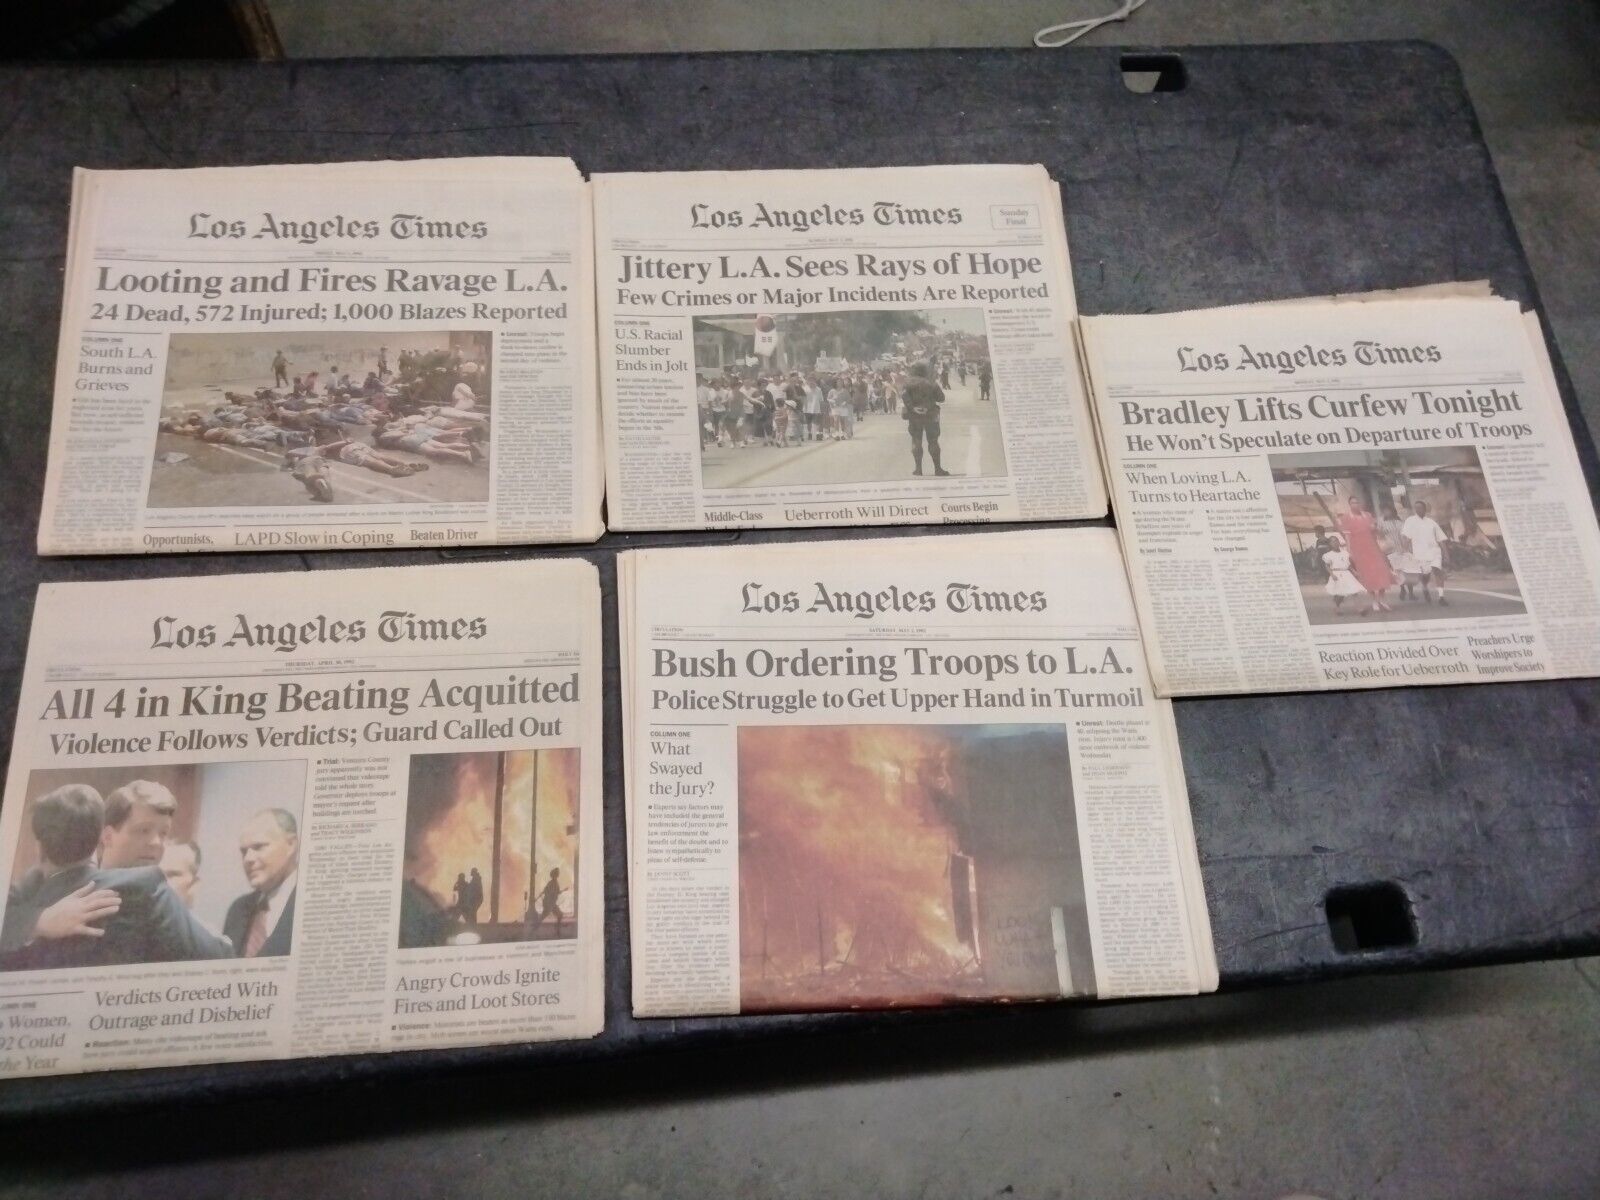 L.A. RIOT'S LOS ANGELES TIMES NEWSPAPERS Rodney King 04/30/92 to 05/4/92